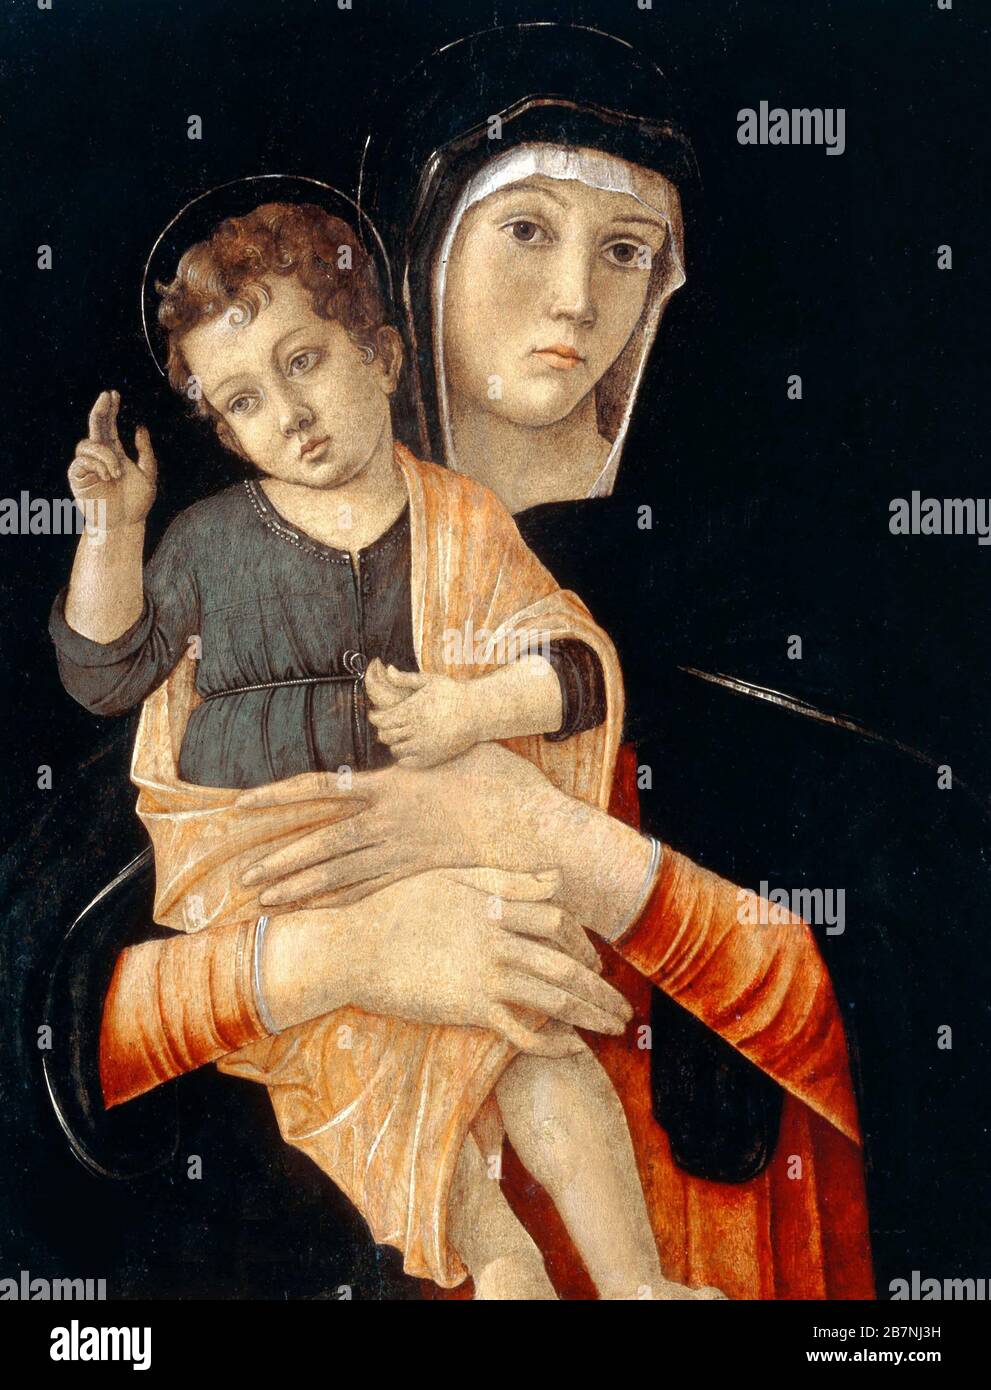 Madonna and Child, 1475-1480. Found in the Collection of Gallerie dell'Accademia, Venice. Stock Photo